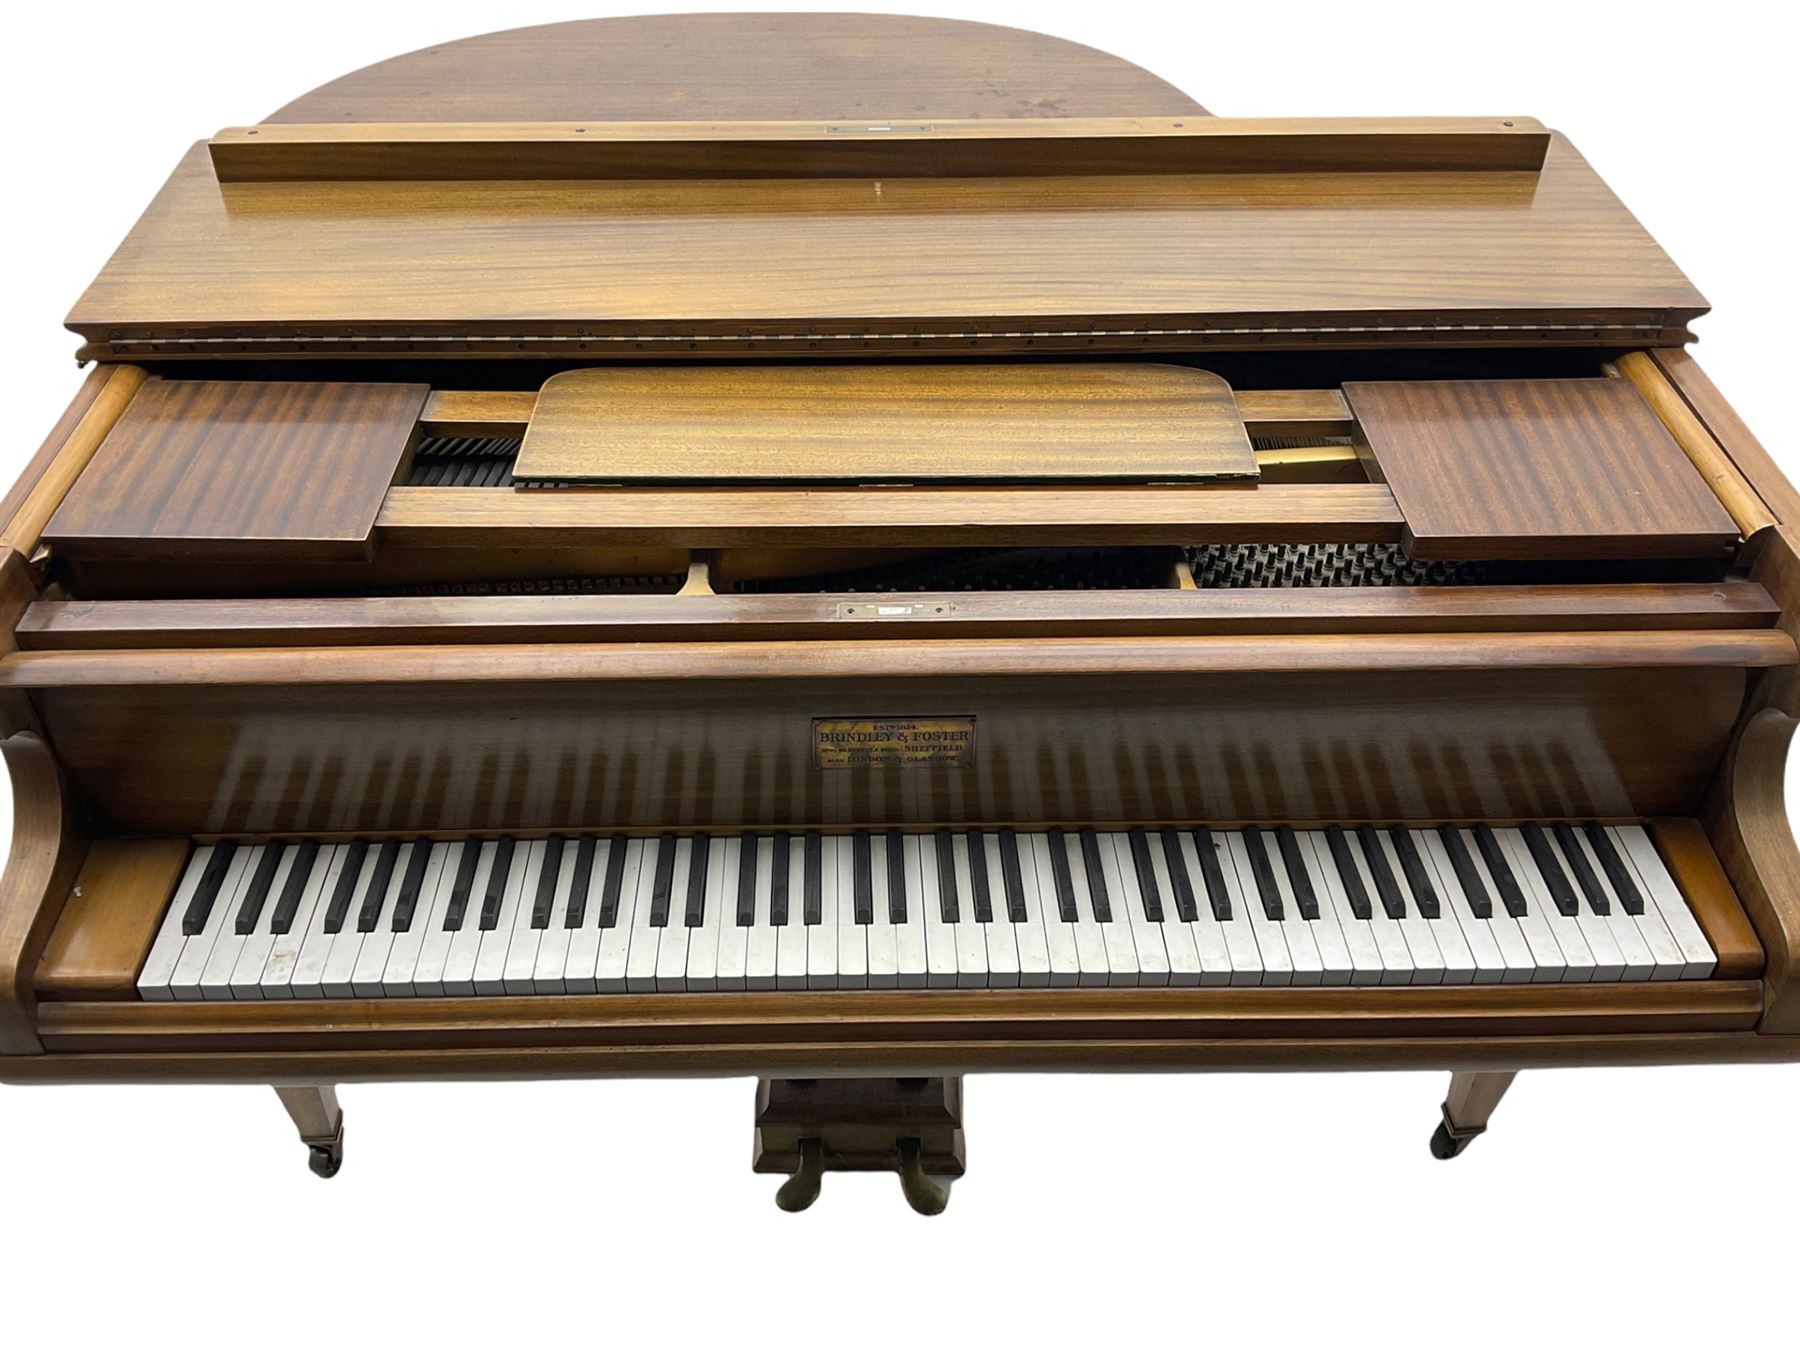 Brindley & Foster mahogany cased baby grand piano - Image 6 of 10